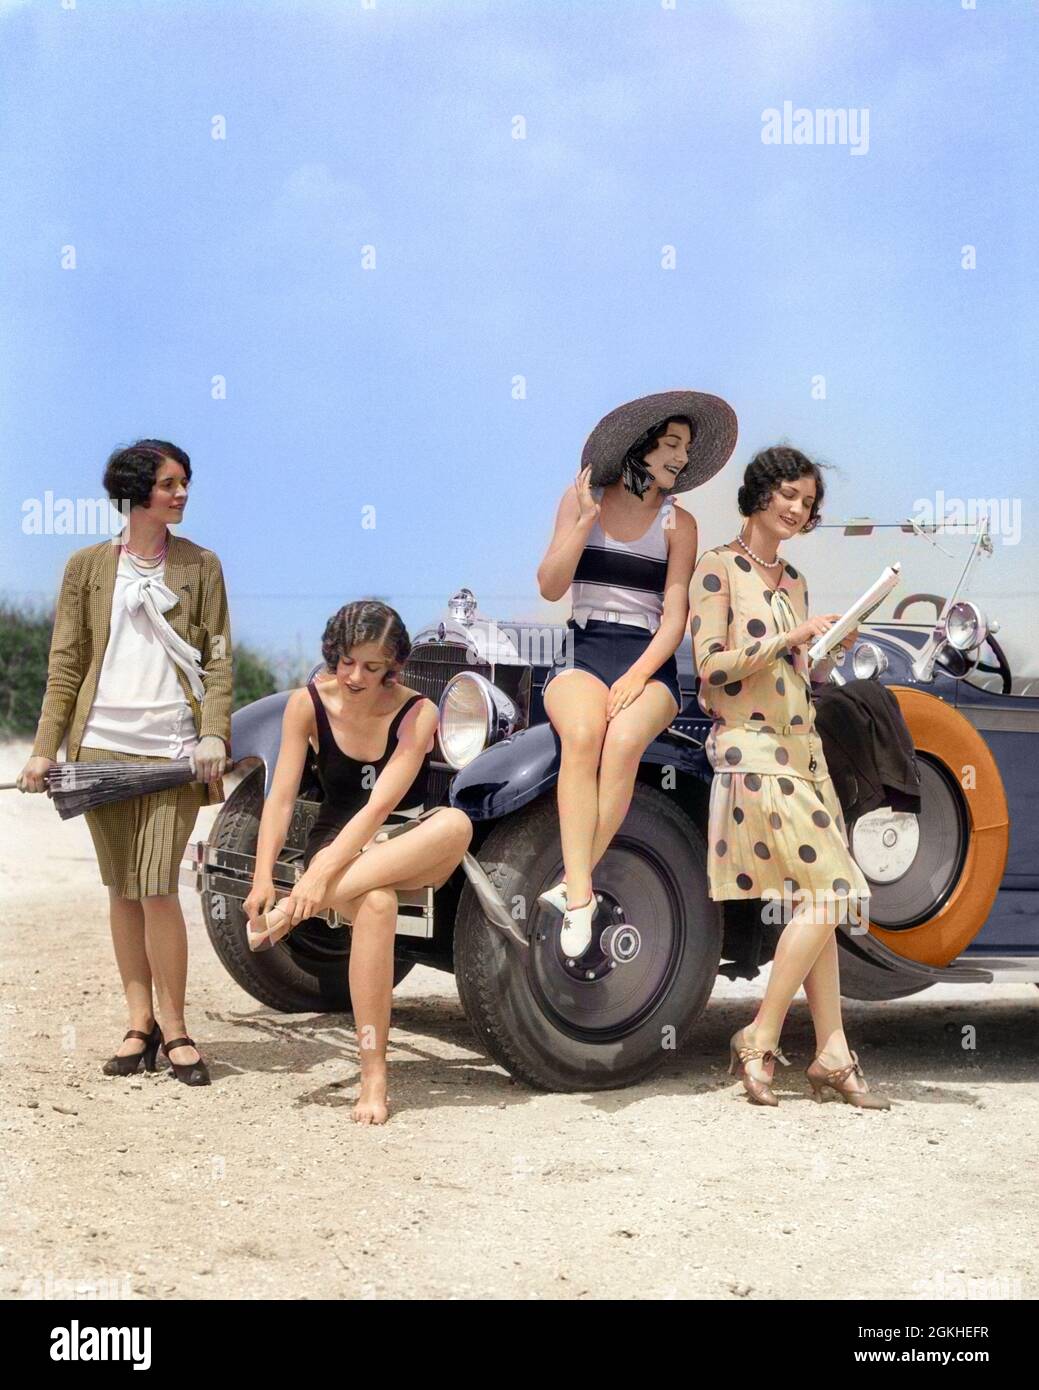 1920s GROUP OF FOUR WOMEN IN CASUAL SEASHORE CLOTHES GATHERED AROUND CONVERTIBLE CAR TWO IN DRESSES & TWO IN BATHING SUITS - m2799c HAR001 HARS FRIEND YOUNG ADULT SWIMSUIT WEALTHY RICH LIFESTYLE FEMALES PORTRAITS HEALTHINESS LUXURY COPY SPACE FRIENDSHIP FULL-LENGTH LADIES PERSONS AUTOMOBILE SUNNY SIBLINGS SISTERS TRANSPORTATION CONVERTIBLES SHORE HAPPINESS CONVERTIBLE TOP LEISURE STYLES CHEESECAKE AUTOS RECREATION AUTOMOTIVE BEACHES MOTORING SIBLING UPSCALE STRAW HAT WHITE SAND AFFLUENT AUTOMOBILES FRIENDLY SANDY STYLISH BATHING SUIT MOTORIST DAYLIGHT FASHIONS OUTING PACKARD SEASHORE Stock Photo